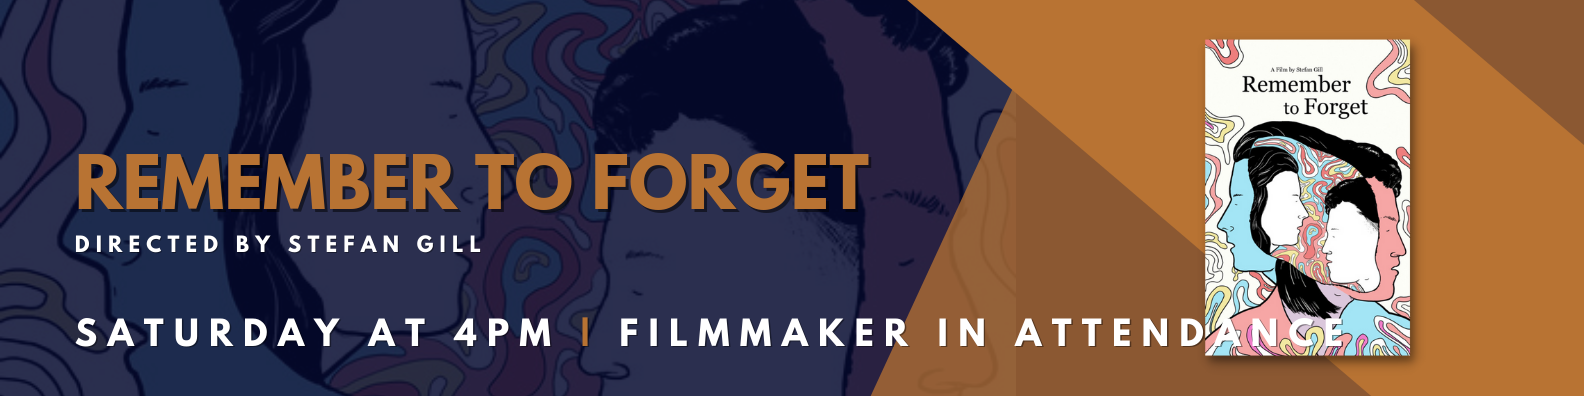 Remember to Forget - Banner